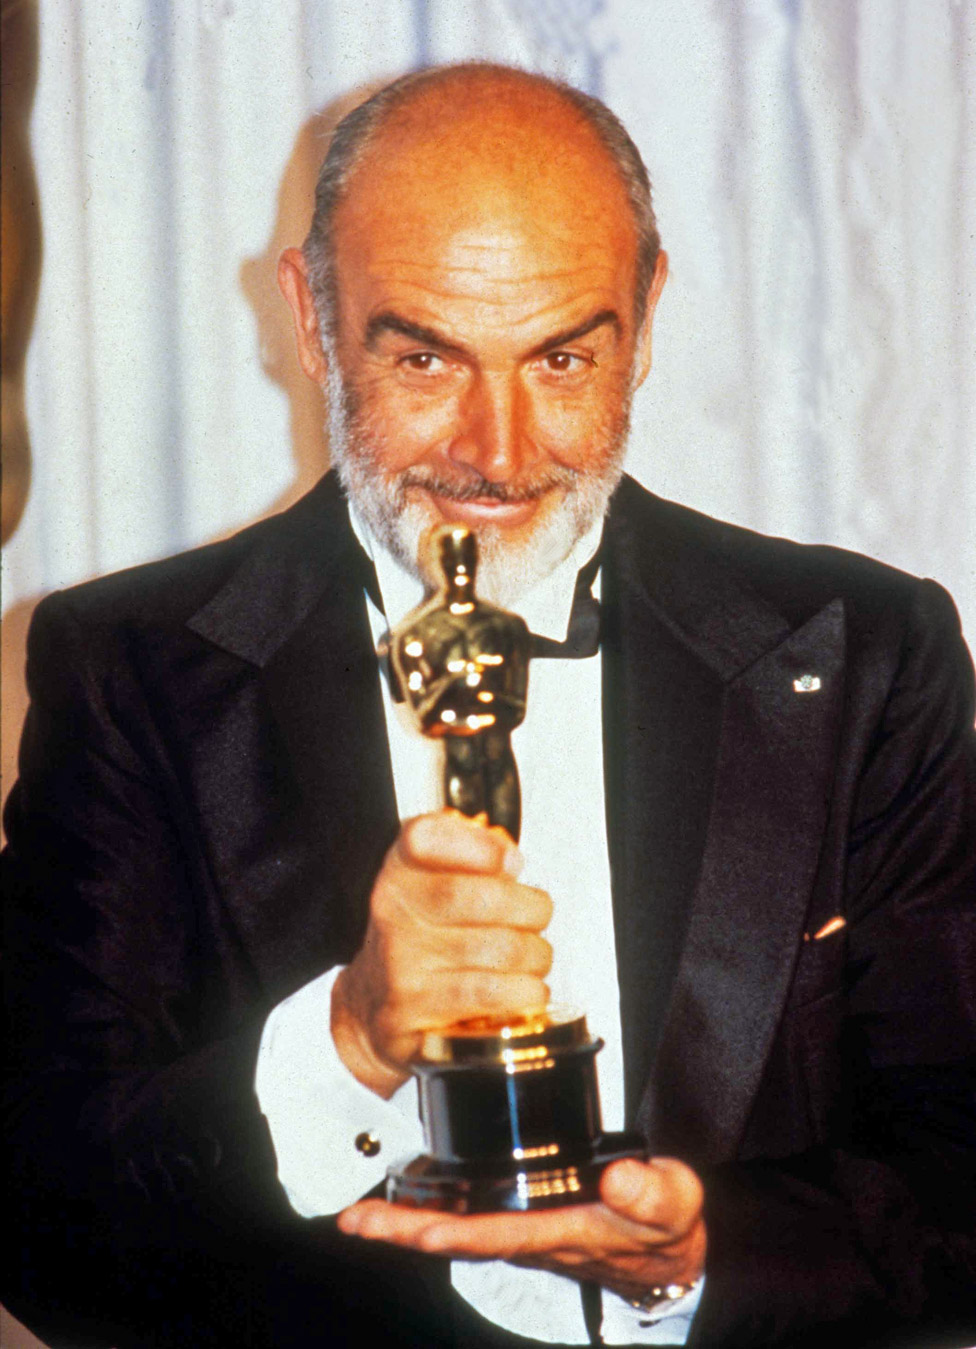 Sean Connery at the 1988 Oscars